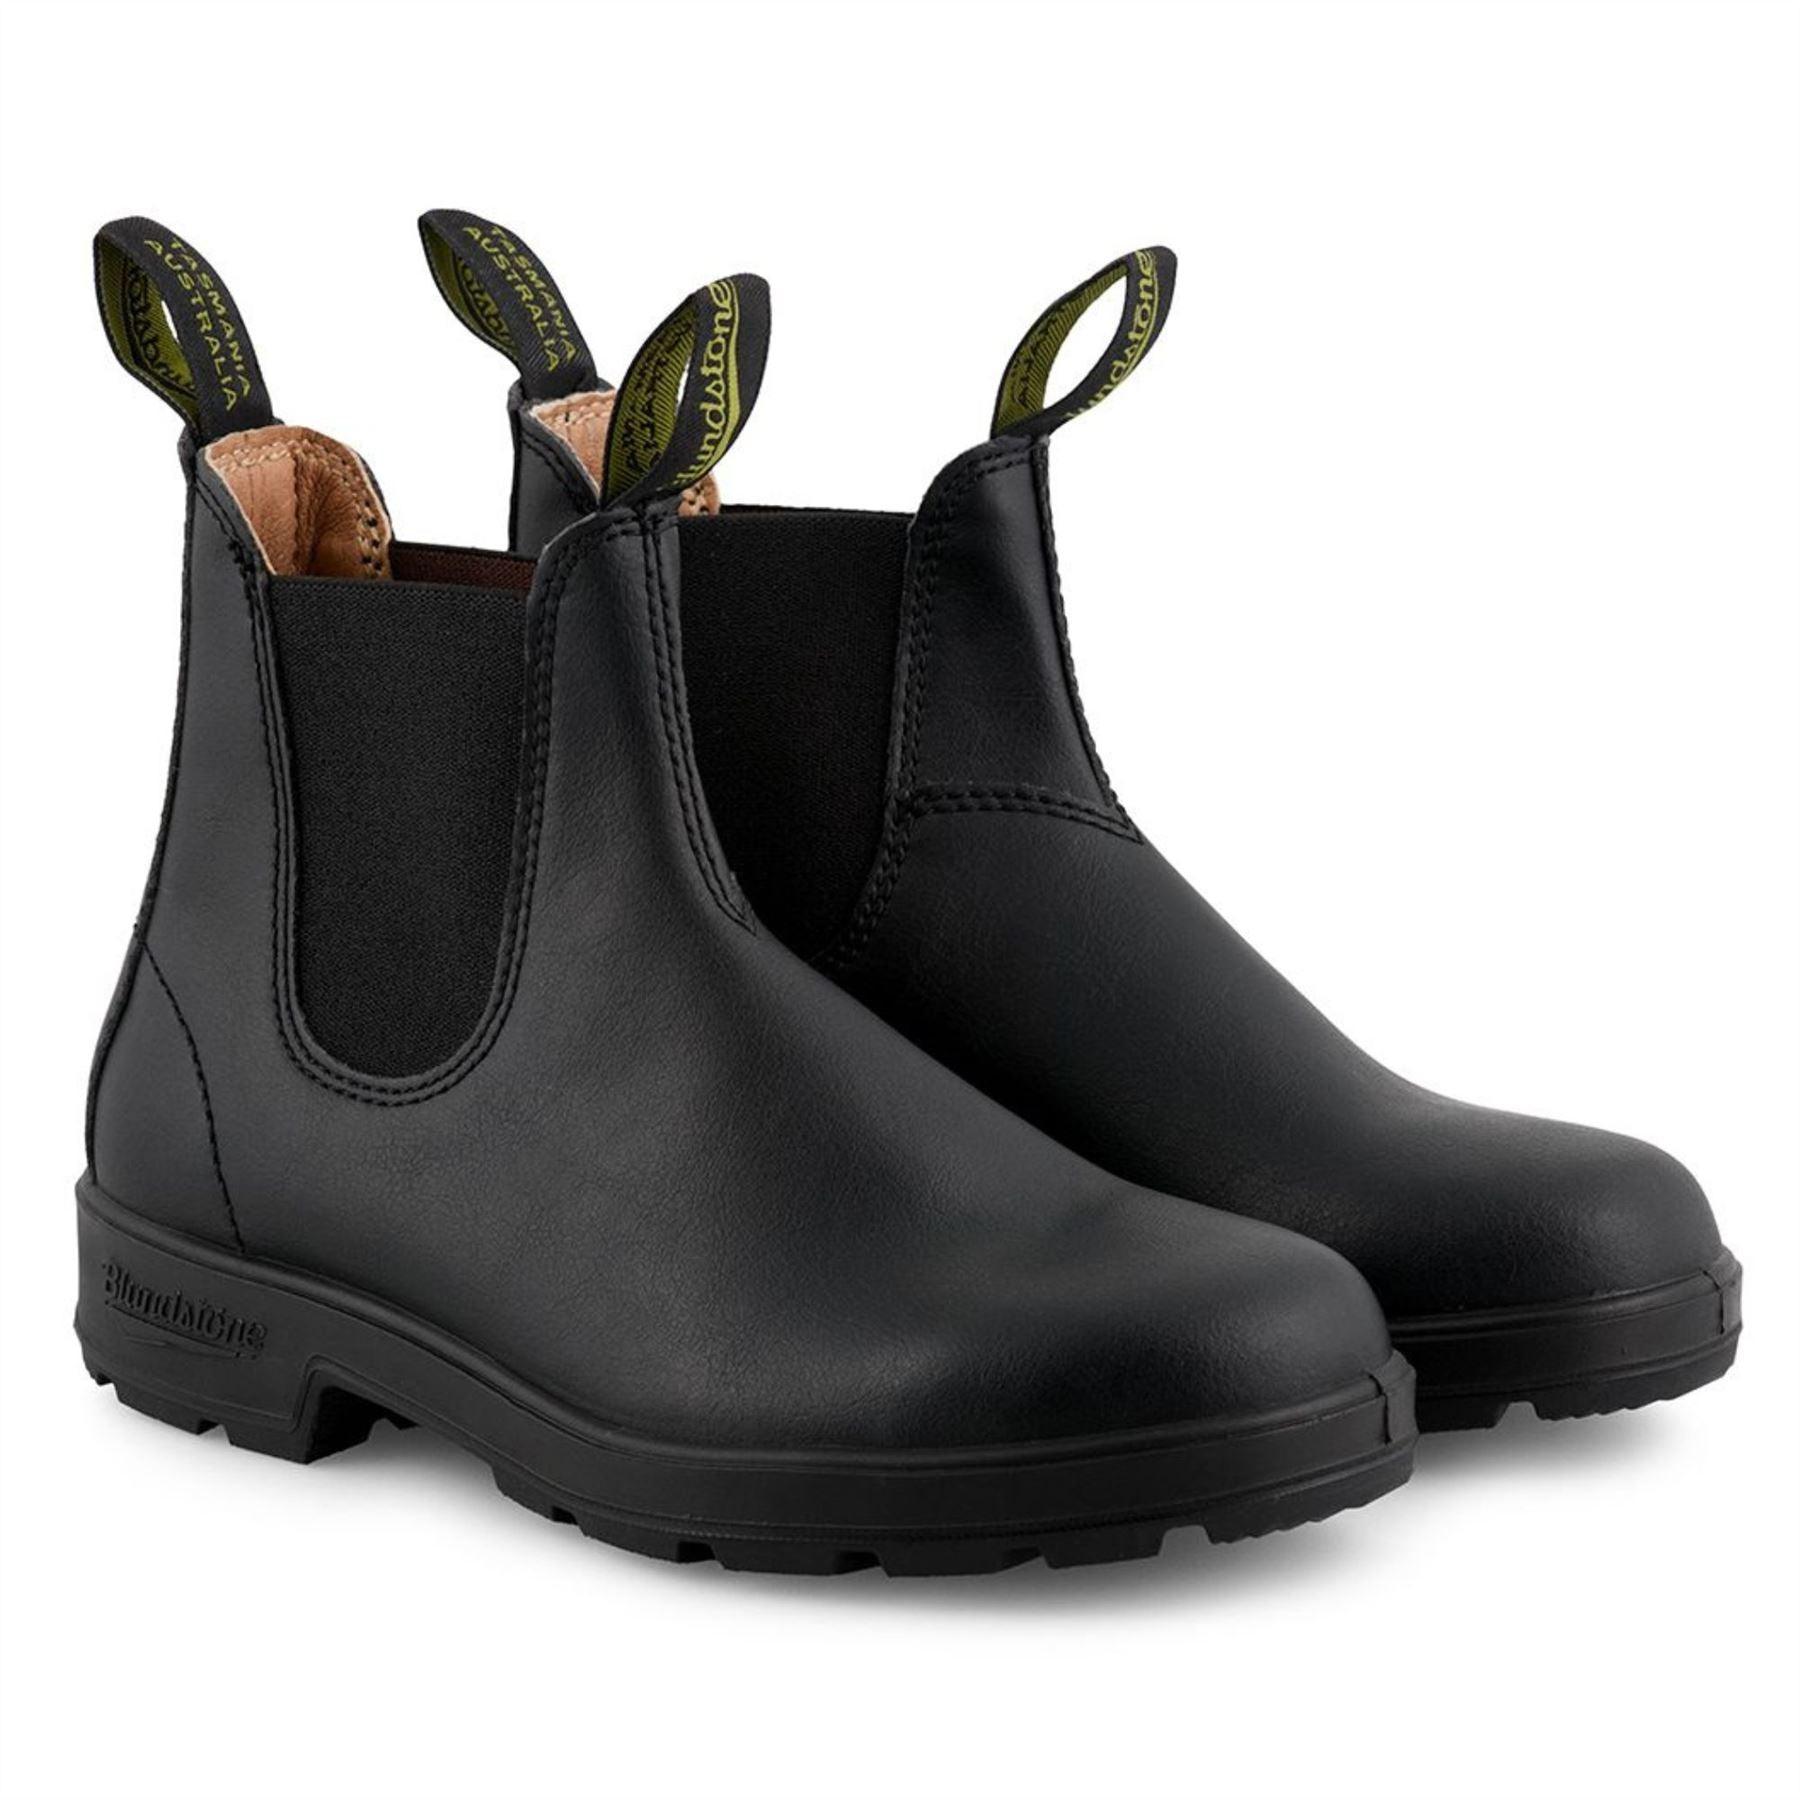 Blundstone 2115 Classic Black Vegan Leather Chelsea Boots Ankle Boots Classic - Knighthood Store